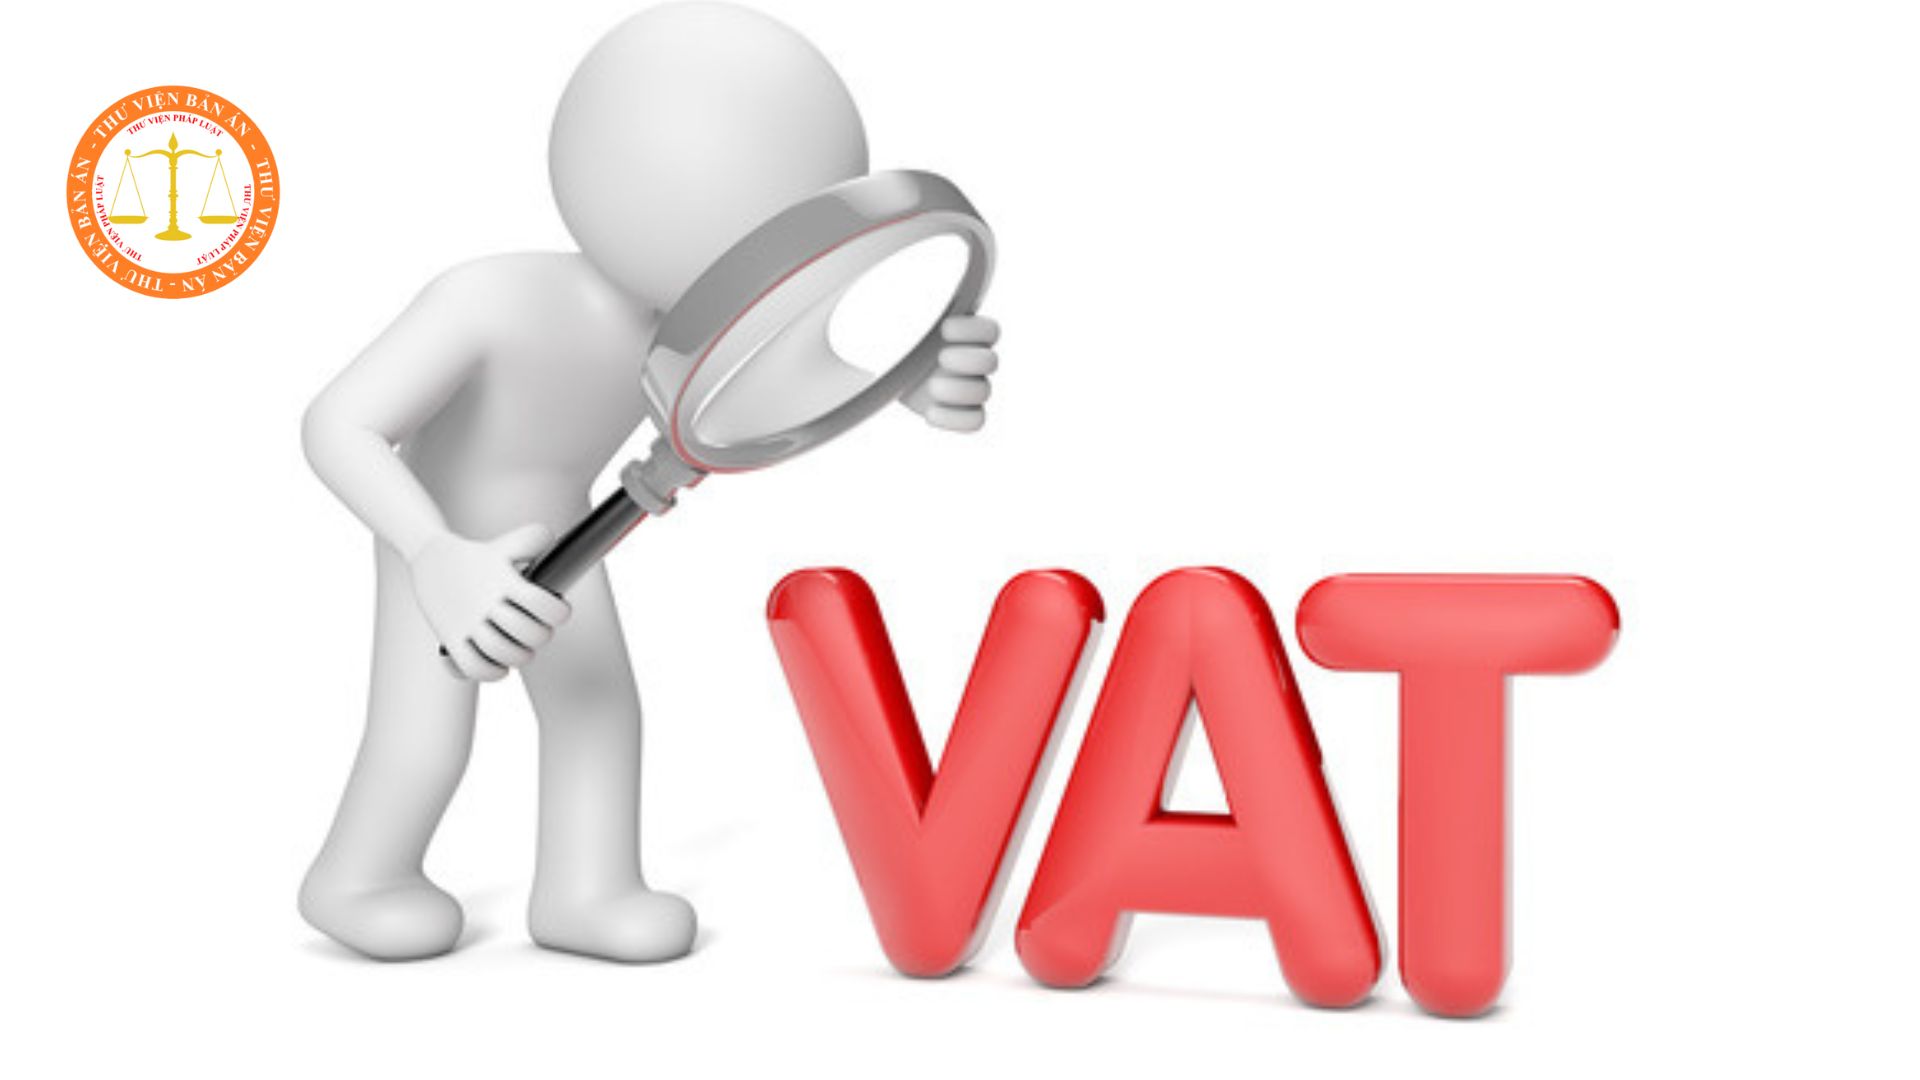 List of goods and services not subject to VAT and goods and services subject to 0% VAT in Vietnam